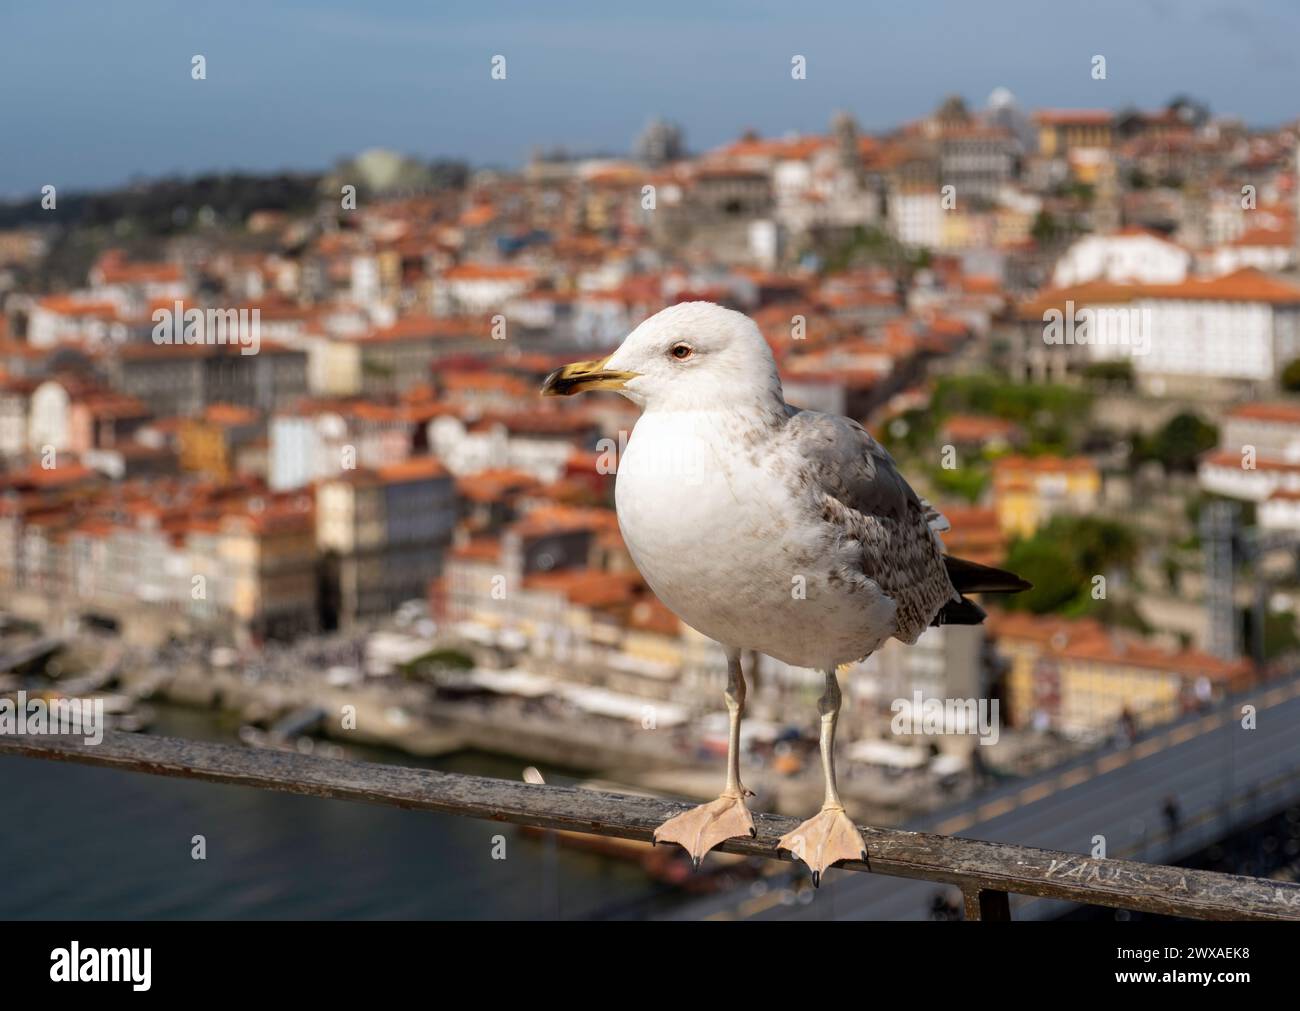 A close-up of a seagull white plumage and yellow beak in focus, with the picturesque Ribeira district in the background, Porto, Portugal. Stock Photo